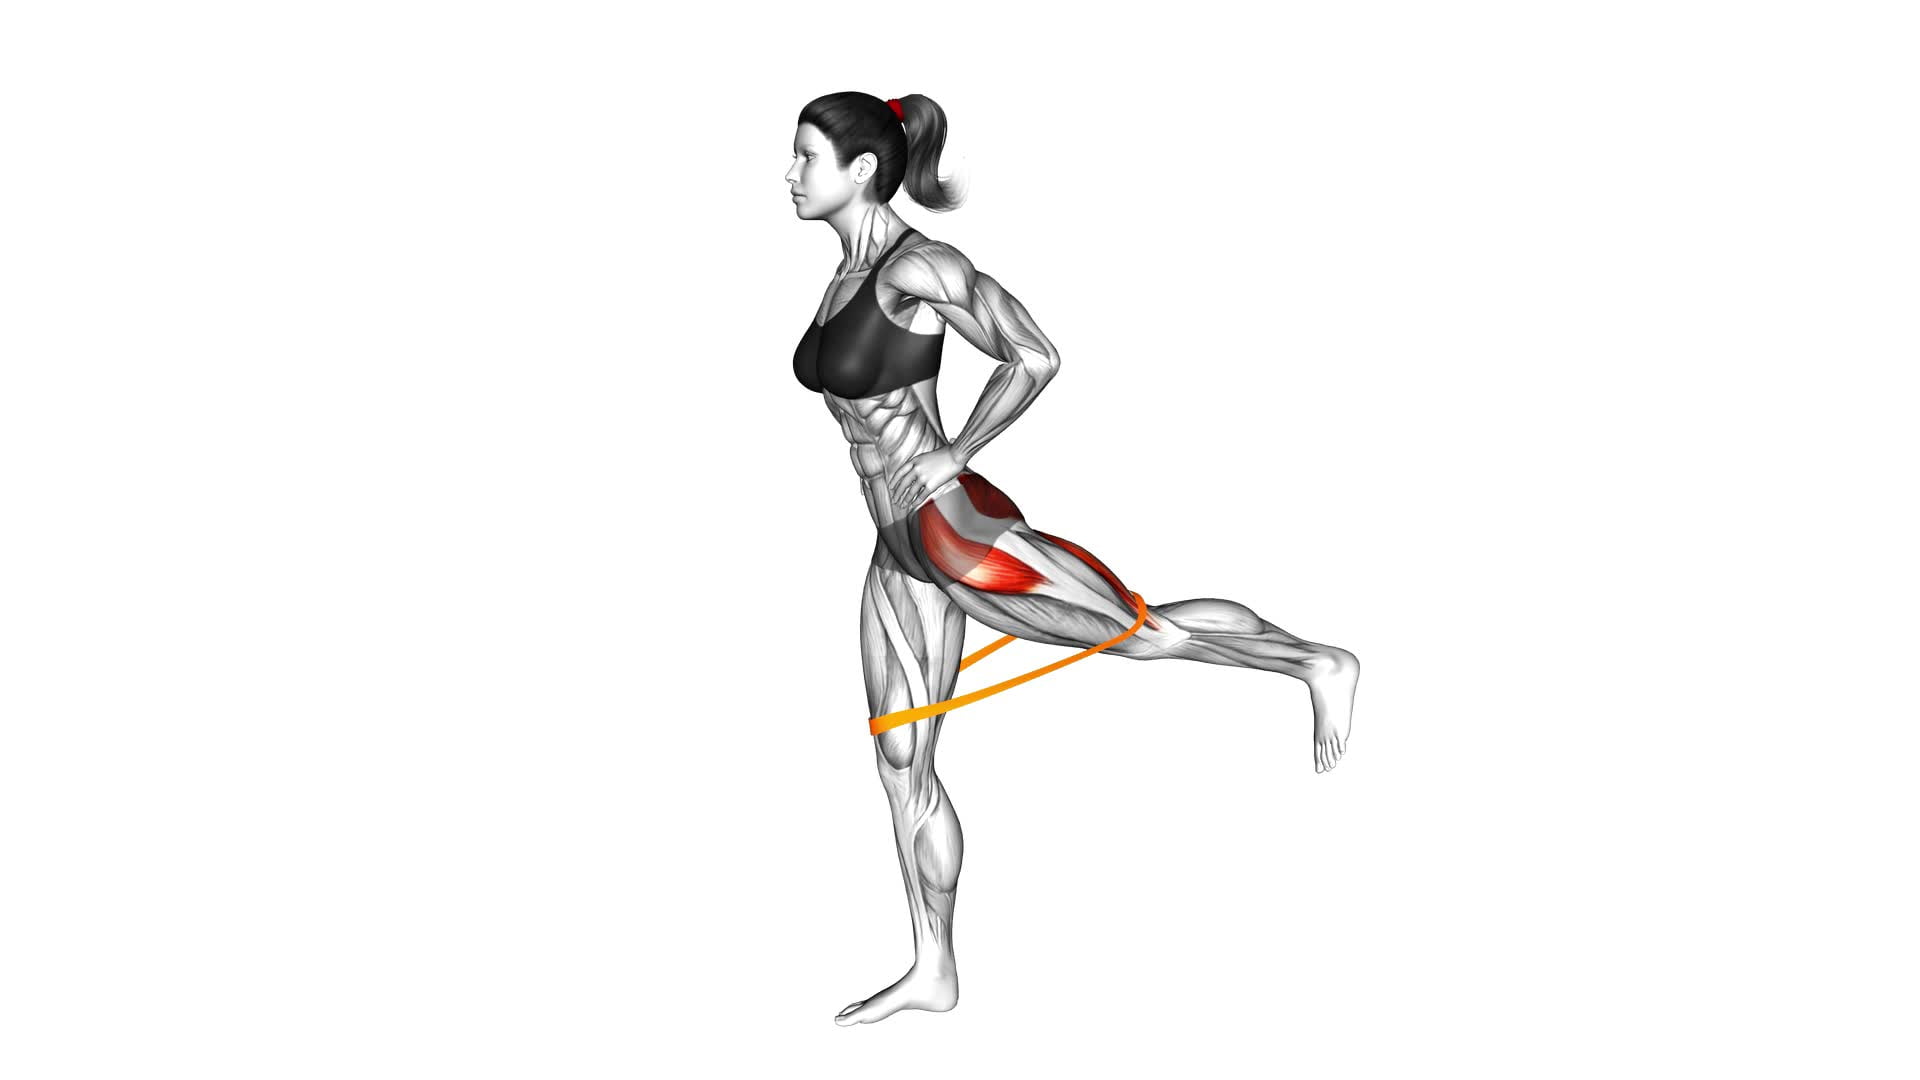 Resistance Band Glute Kickback (VERSION 2) - Video Guide & Tips